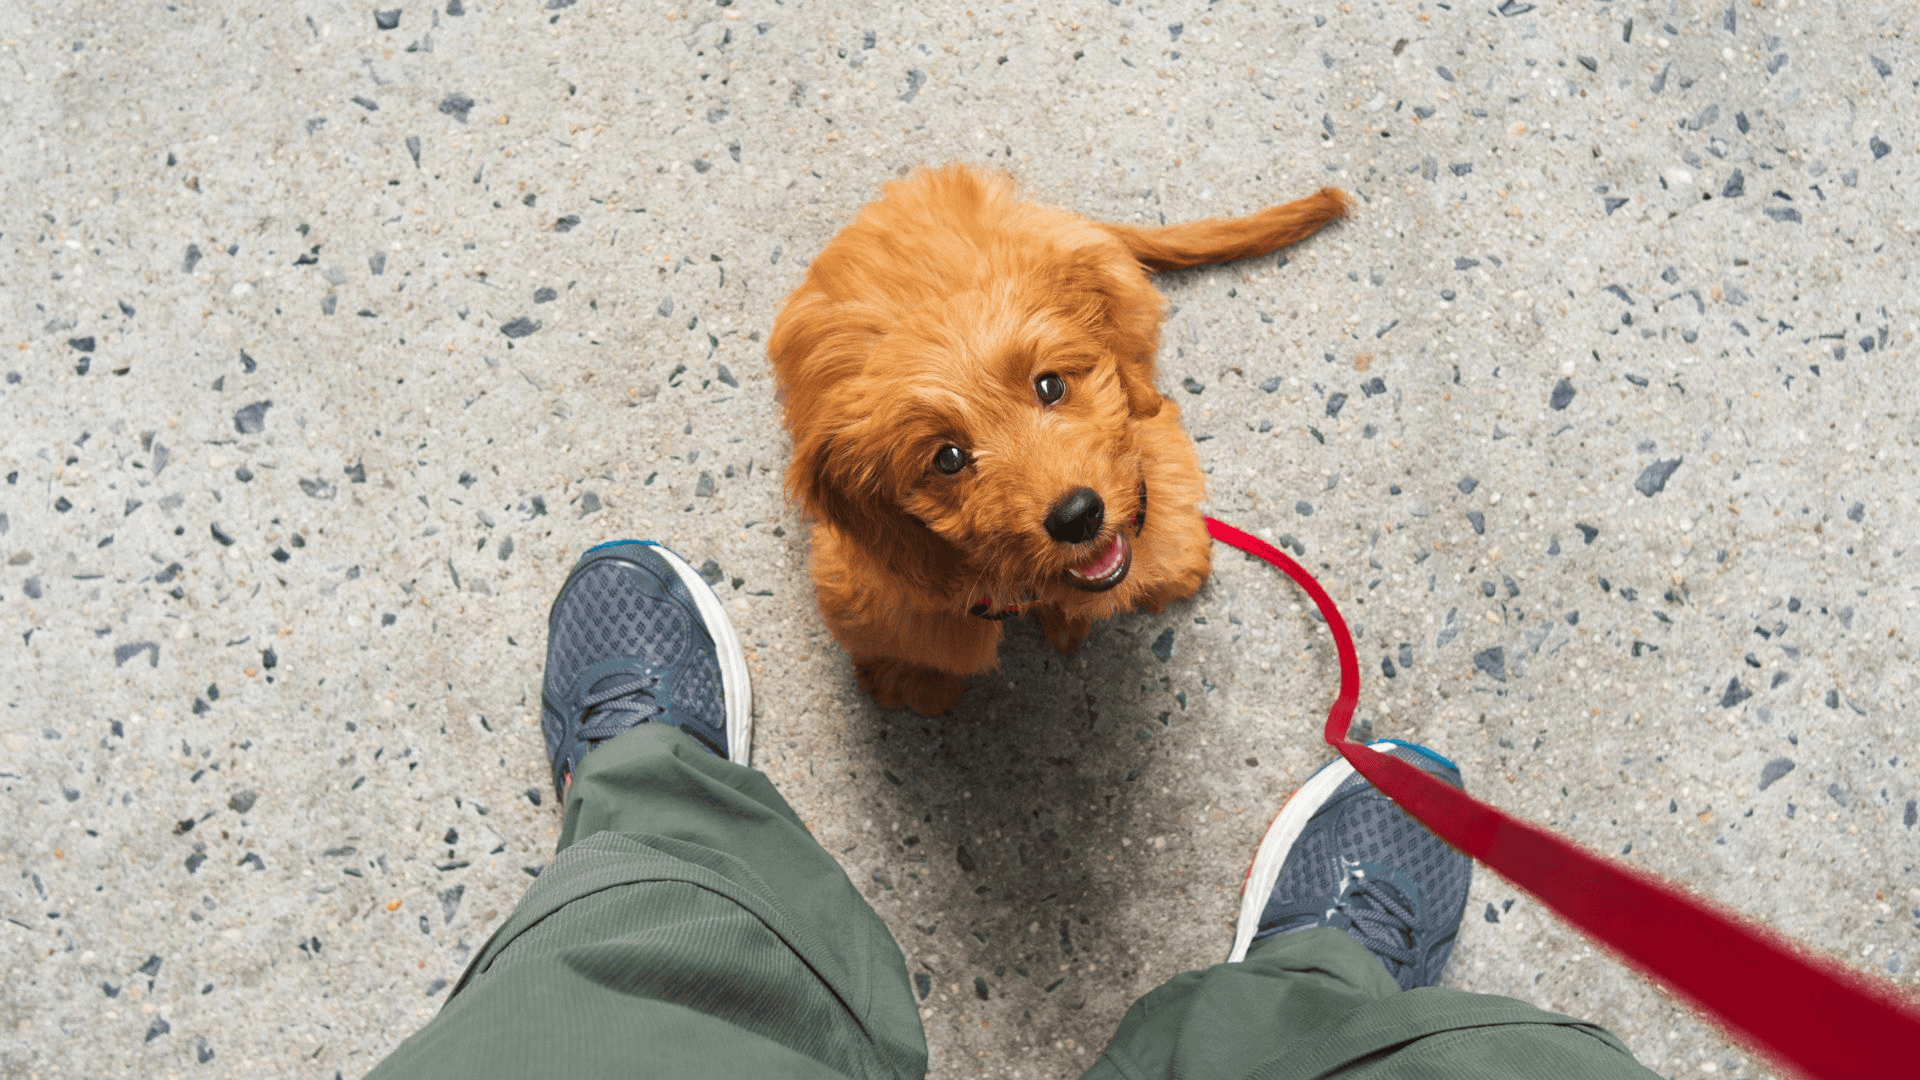 Leash training a puppy is one of the best ways to strengthen your bond. Practice walking indoors with a dog leash first. 